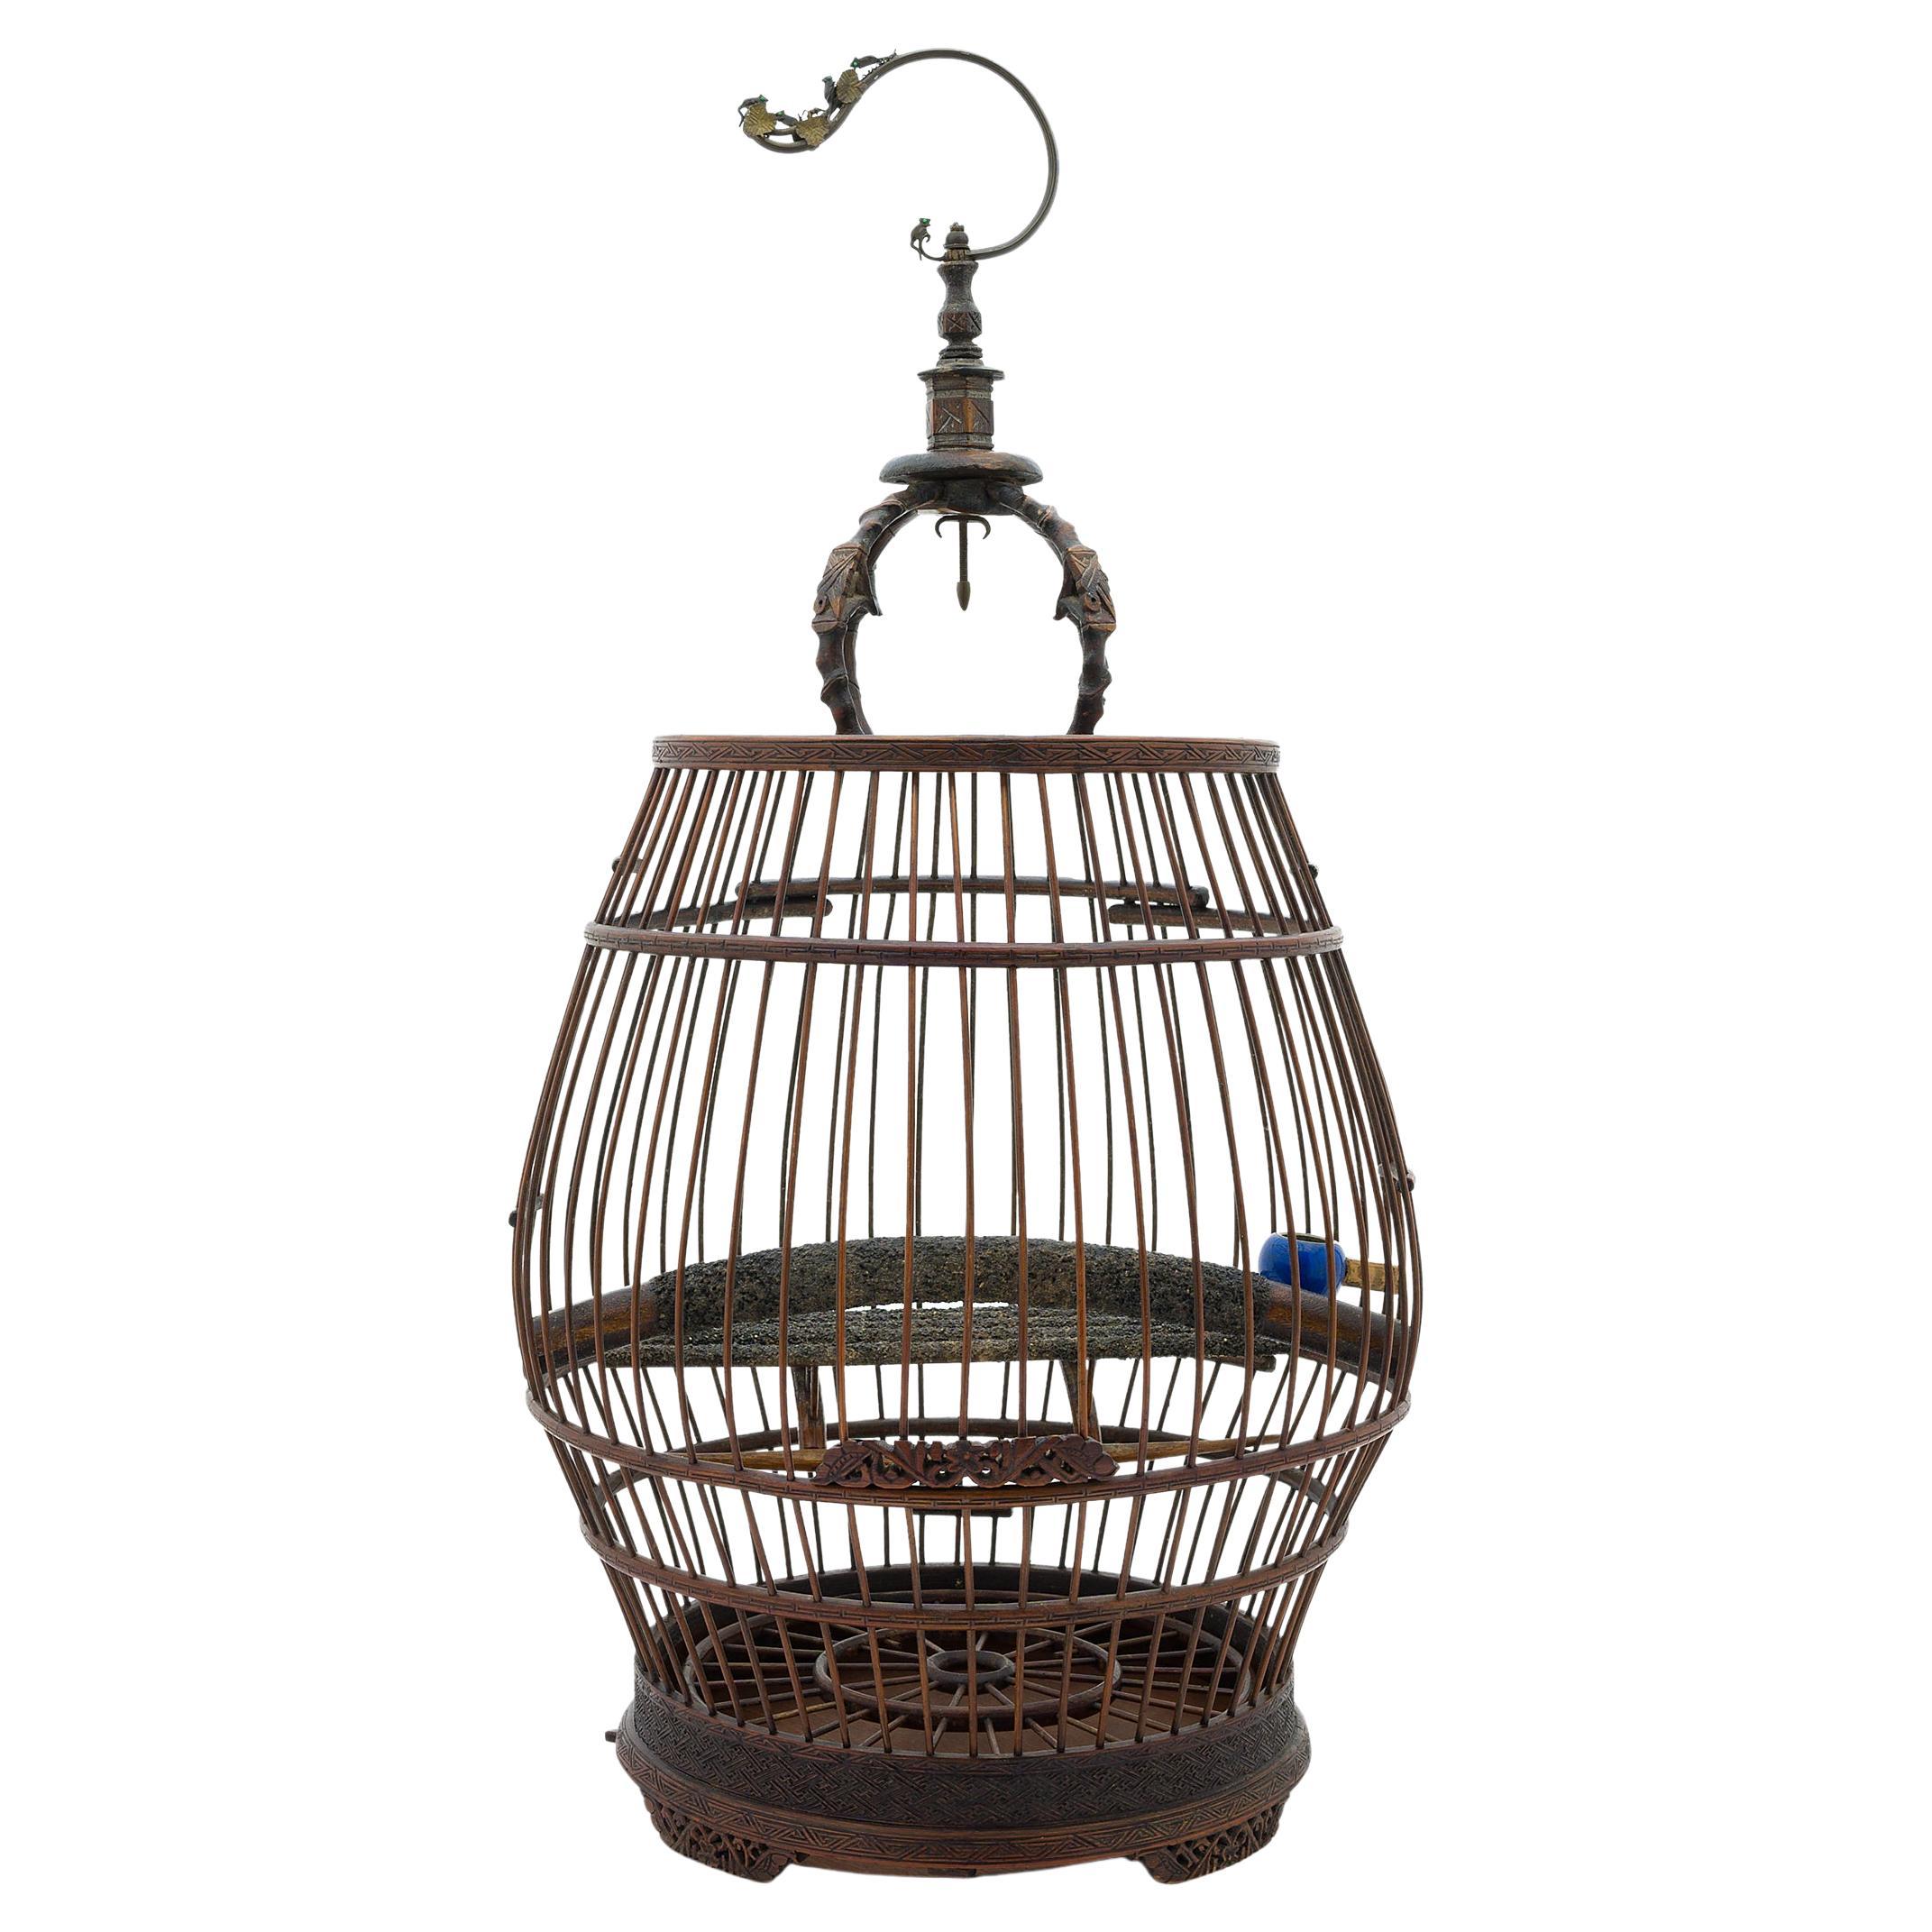 Drum-Form Chinese Birdcage with Faux Branches, circa 1850